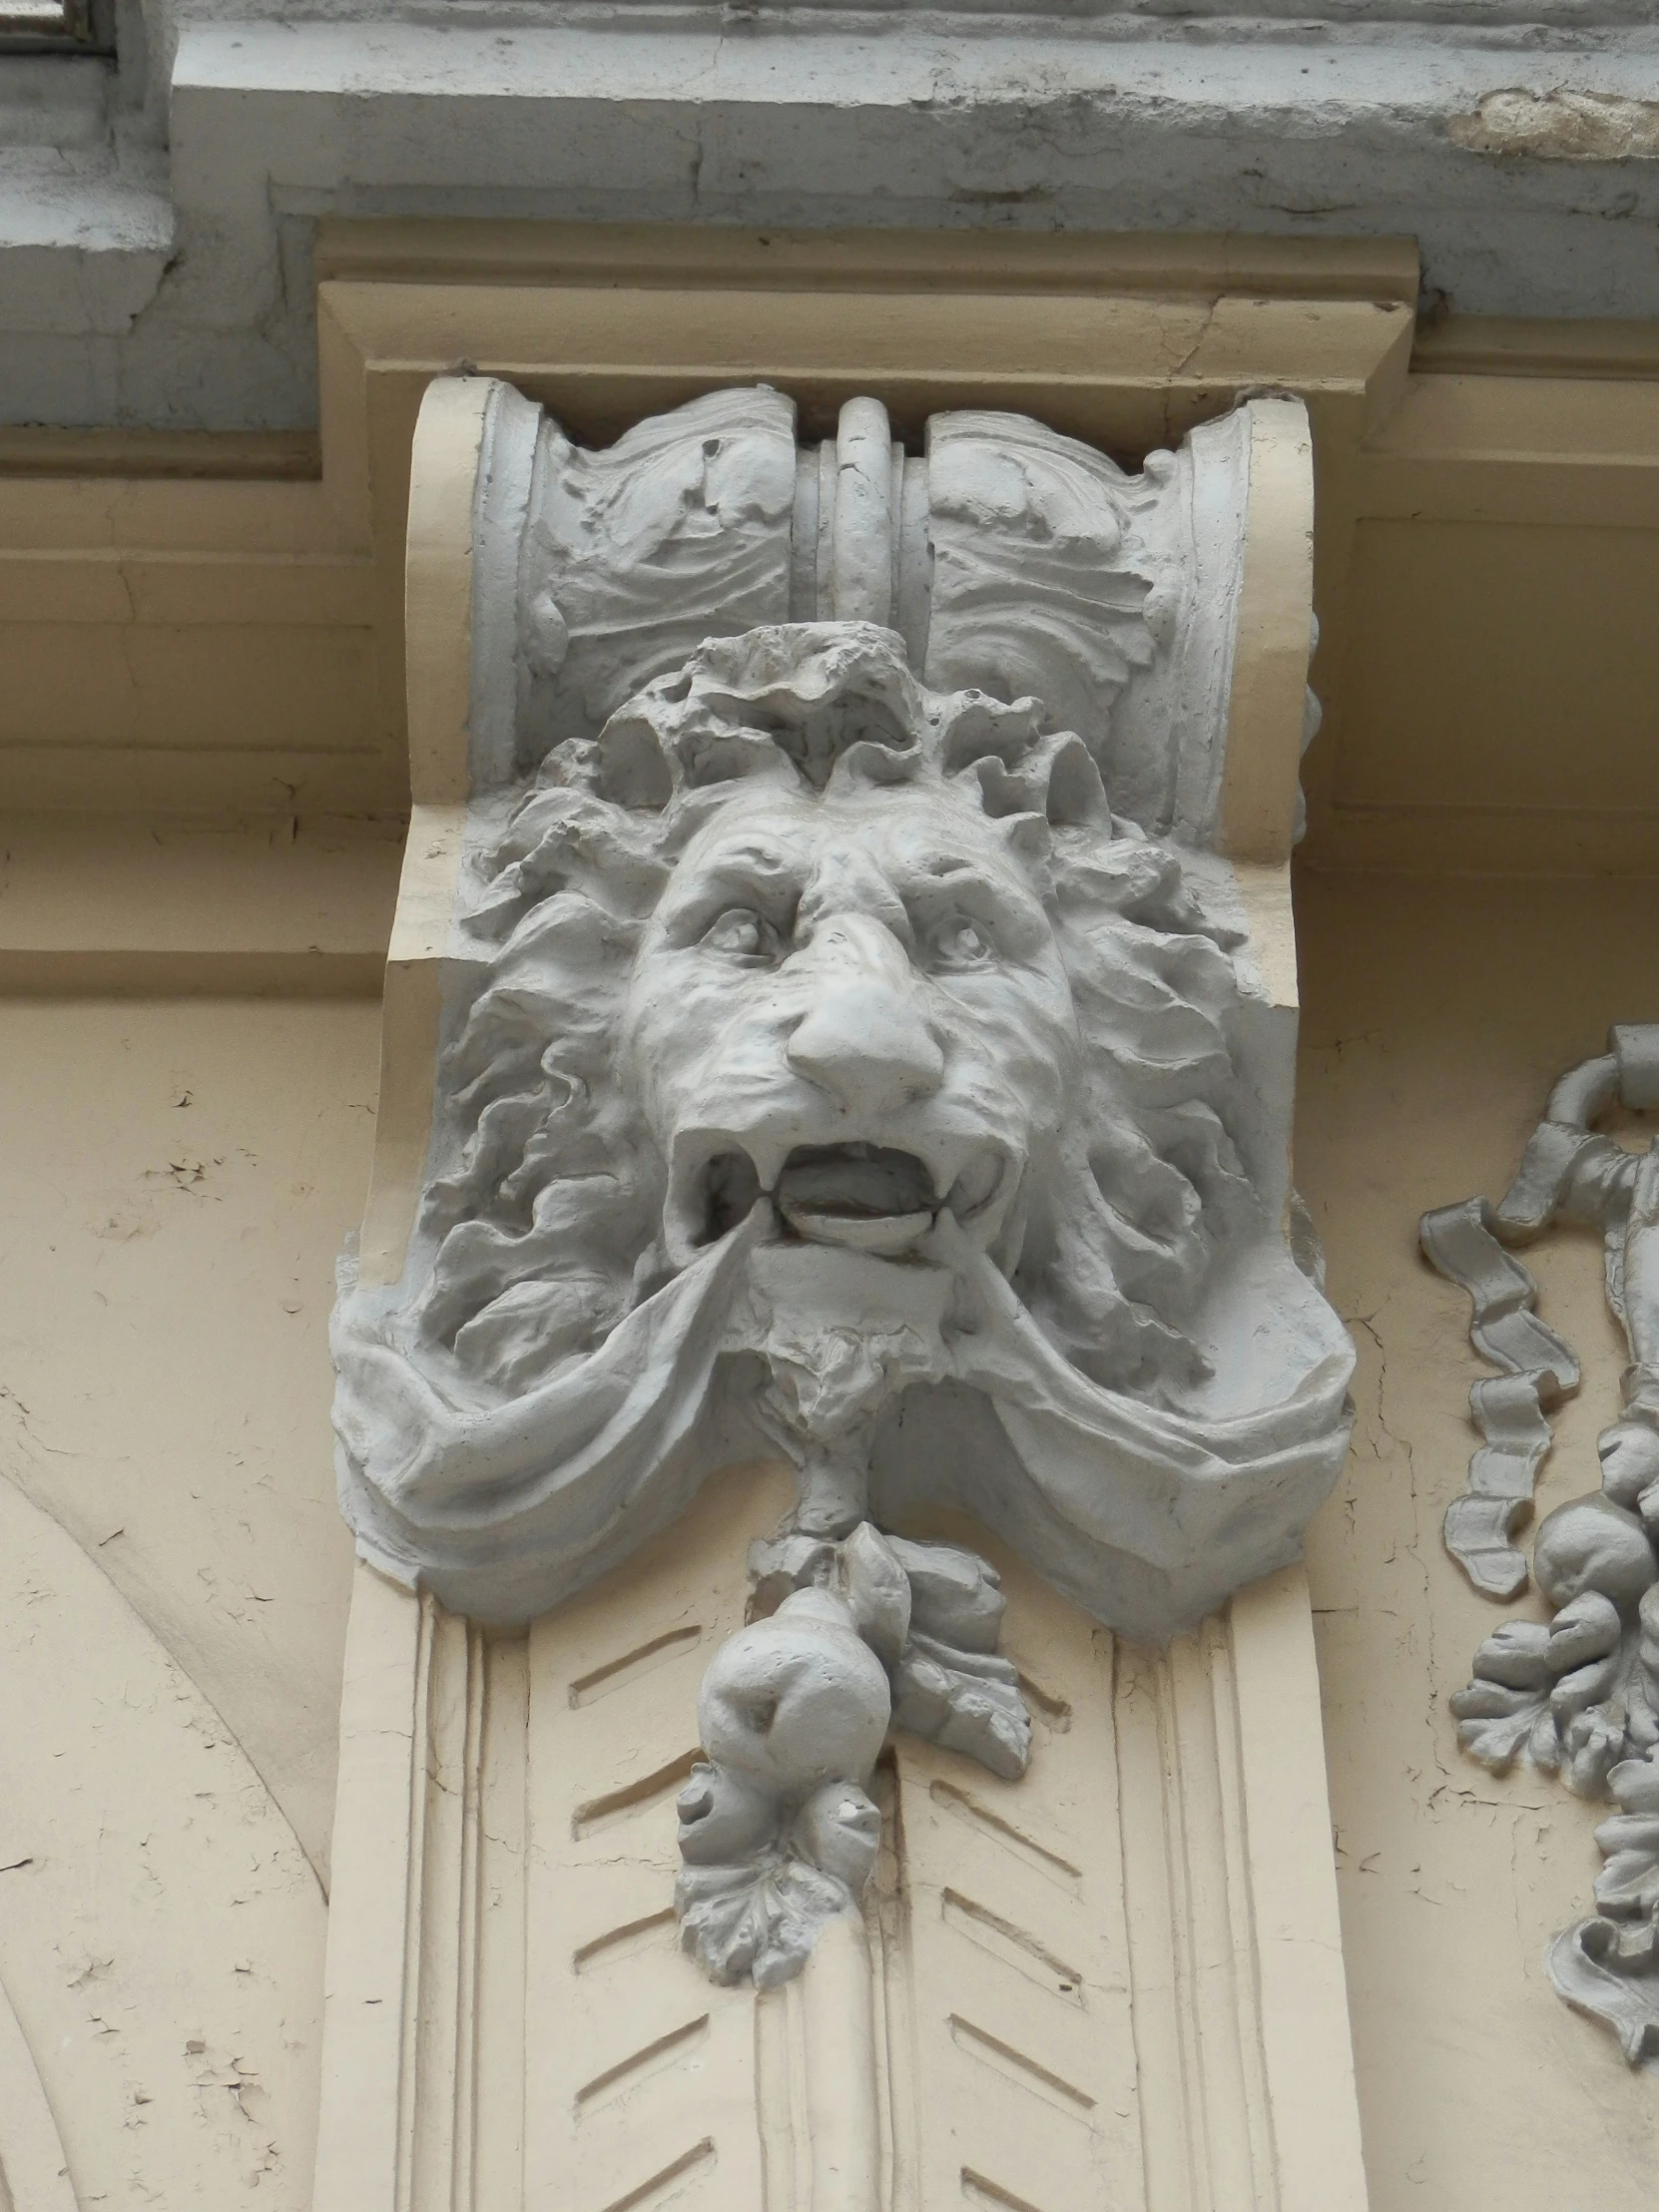 the face of a lion on a building